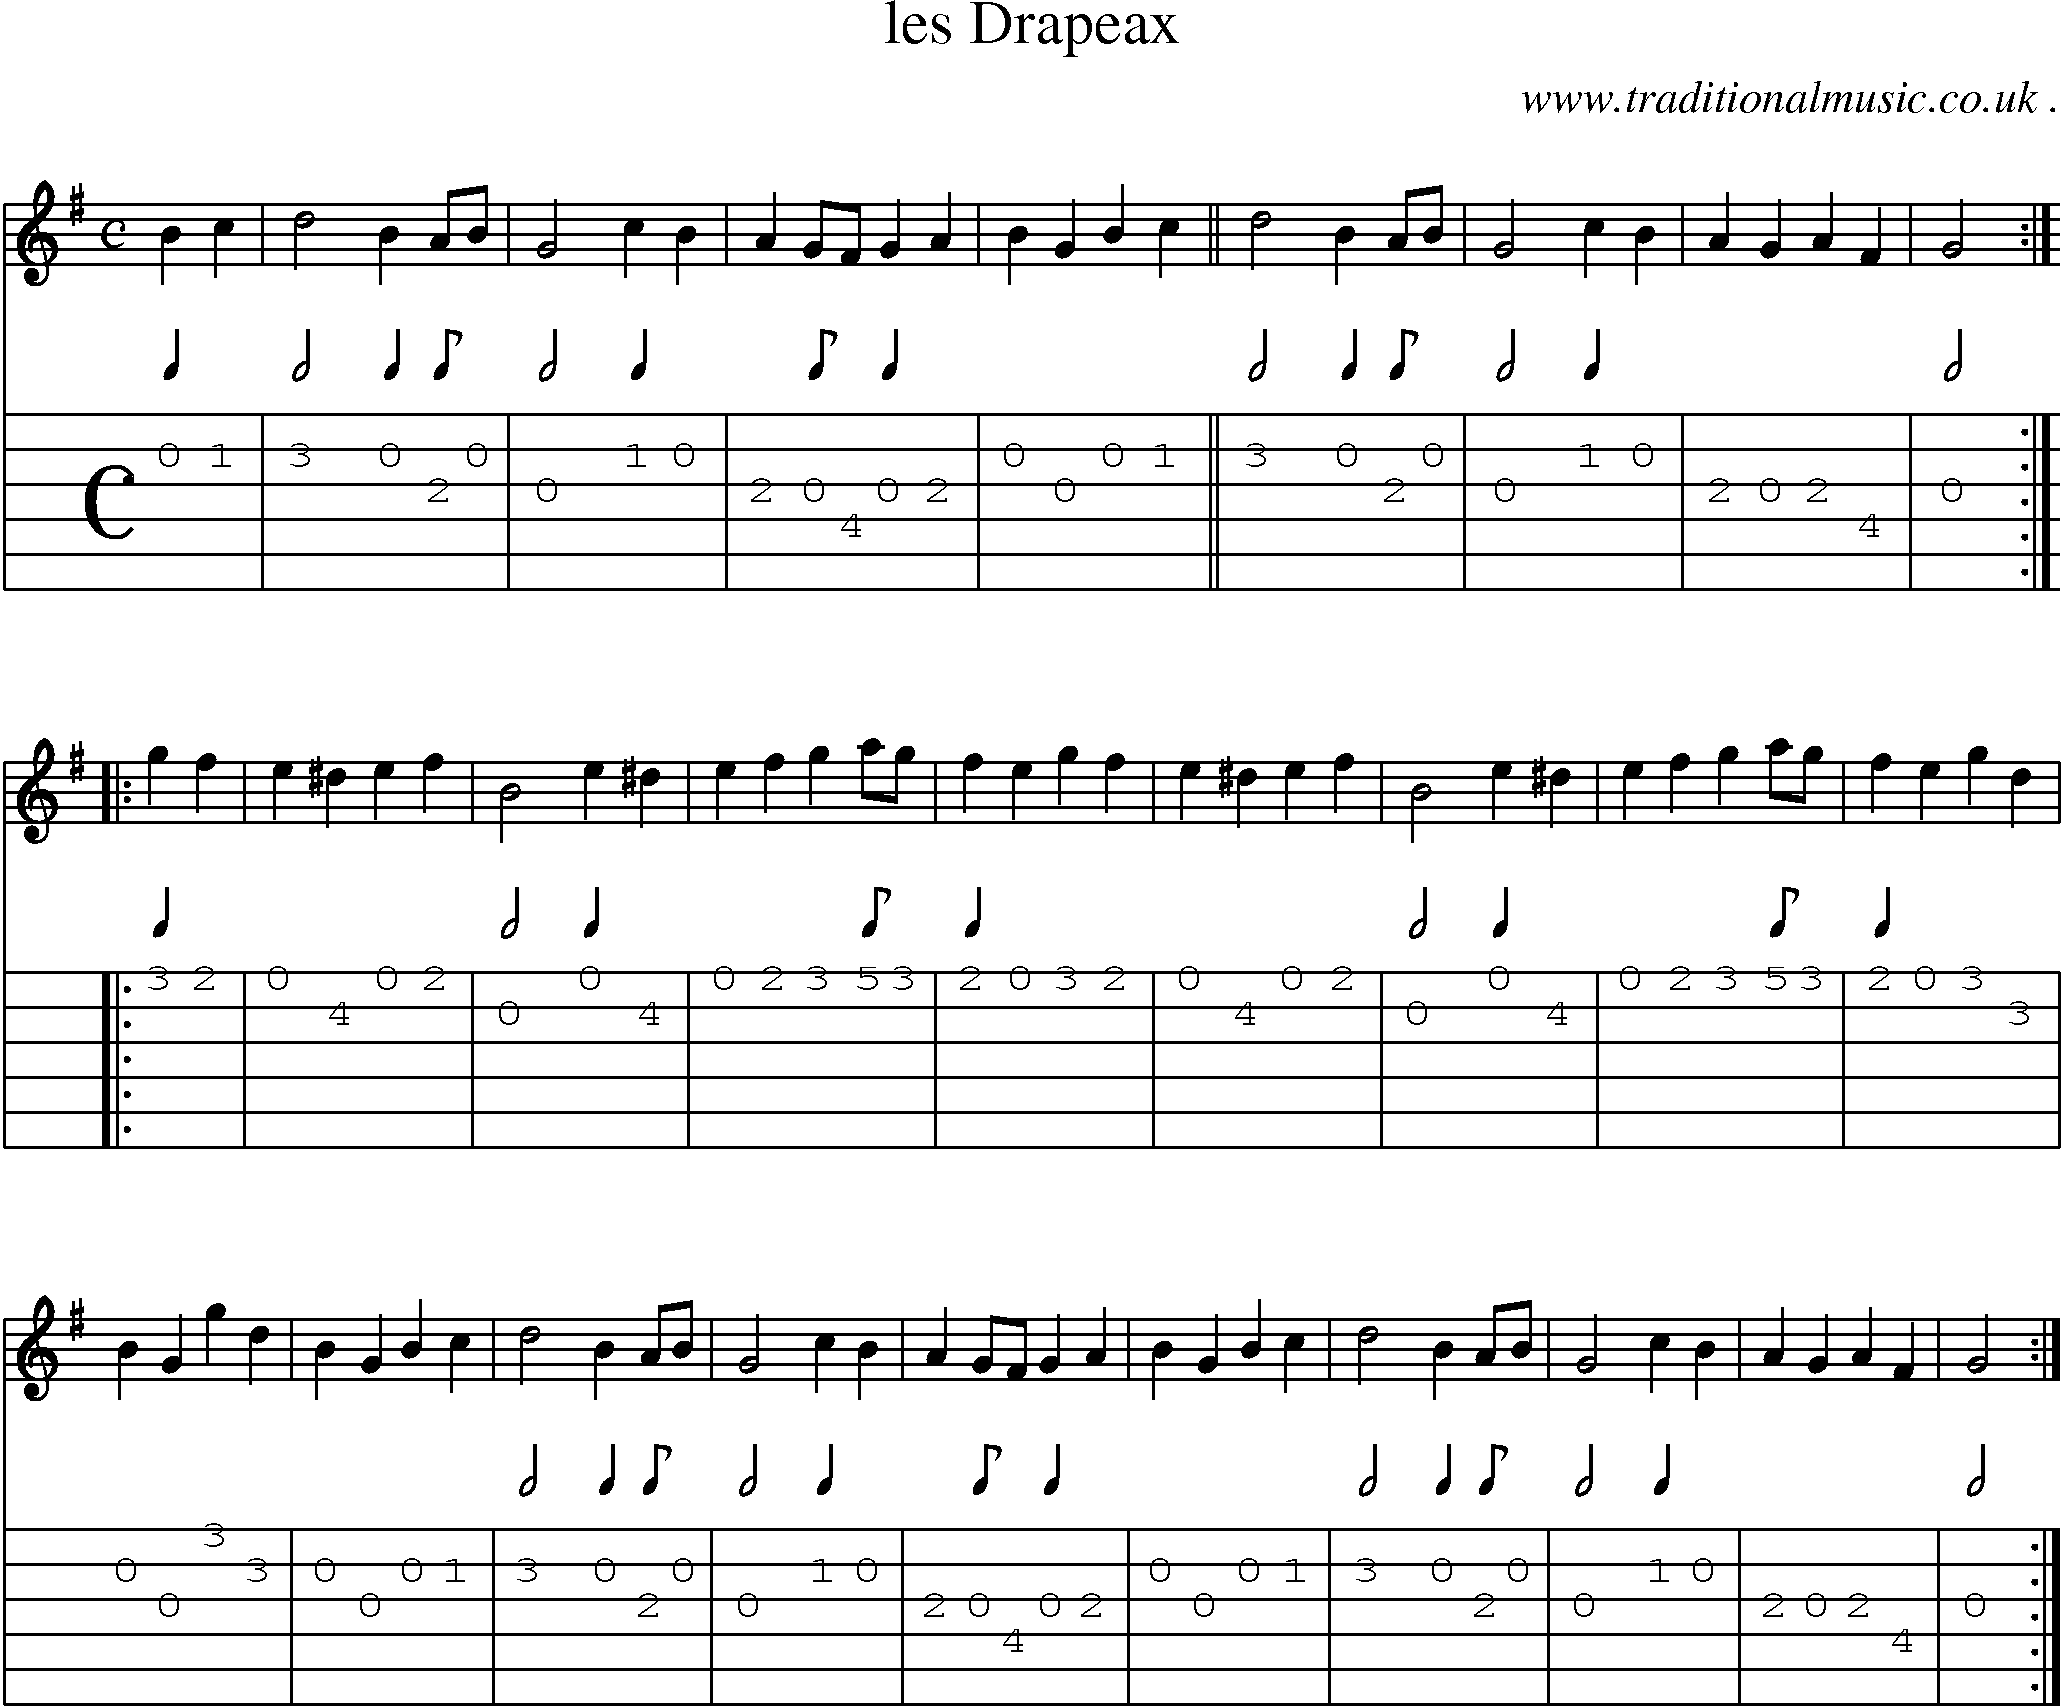 Sheet-Music and Guitar Tabs for Les Drapeax